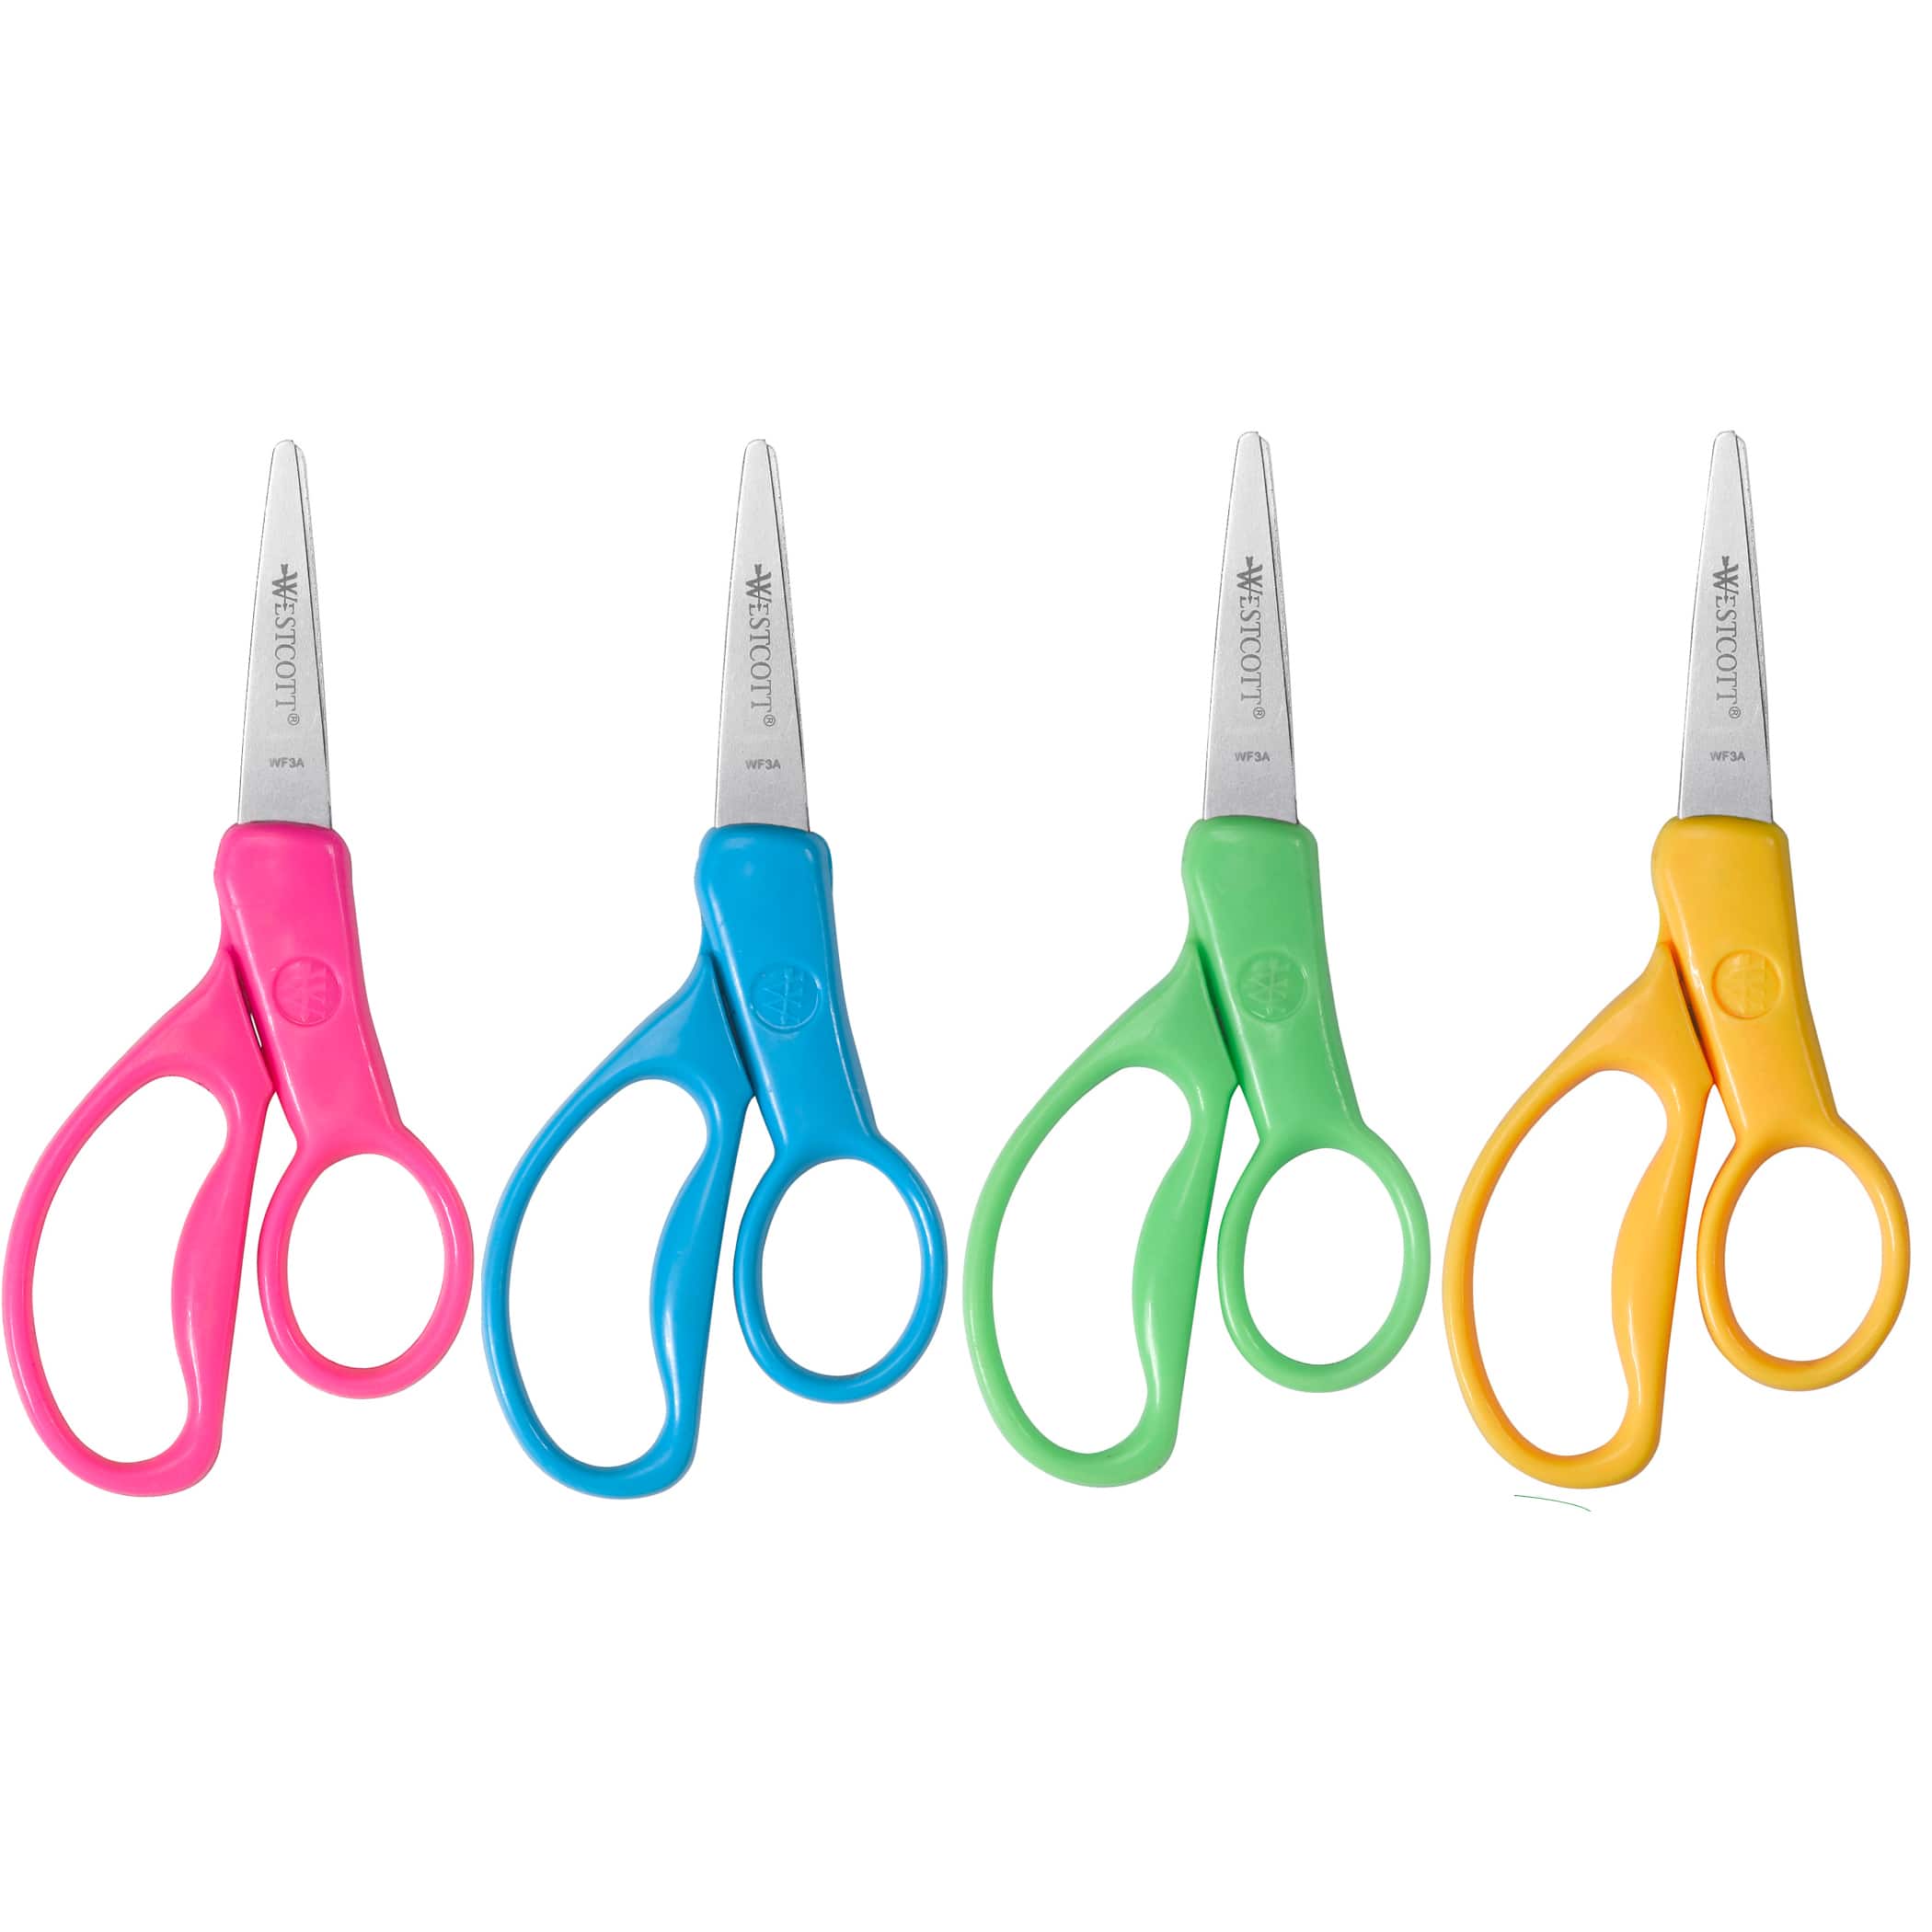 Kids Scissors 12 Count Pointed Kids Scissors right and left-handed scissors  variety colors scissors for school kids Kid Scissors, Craft Scissors